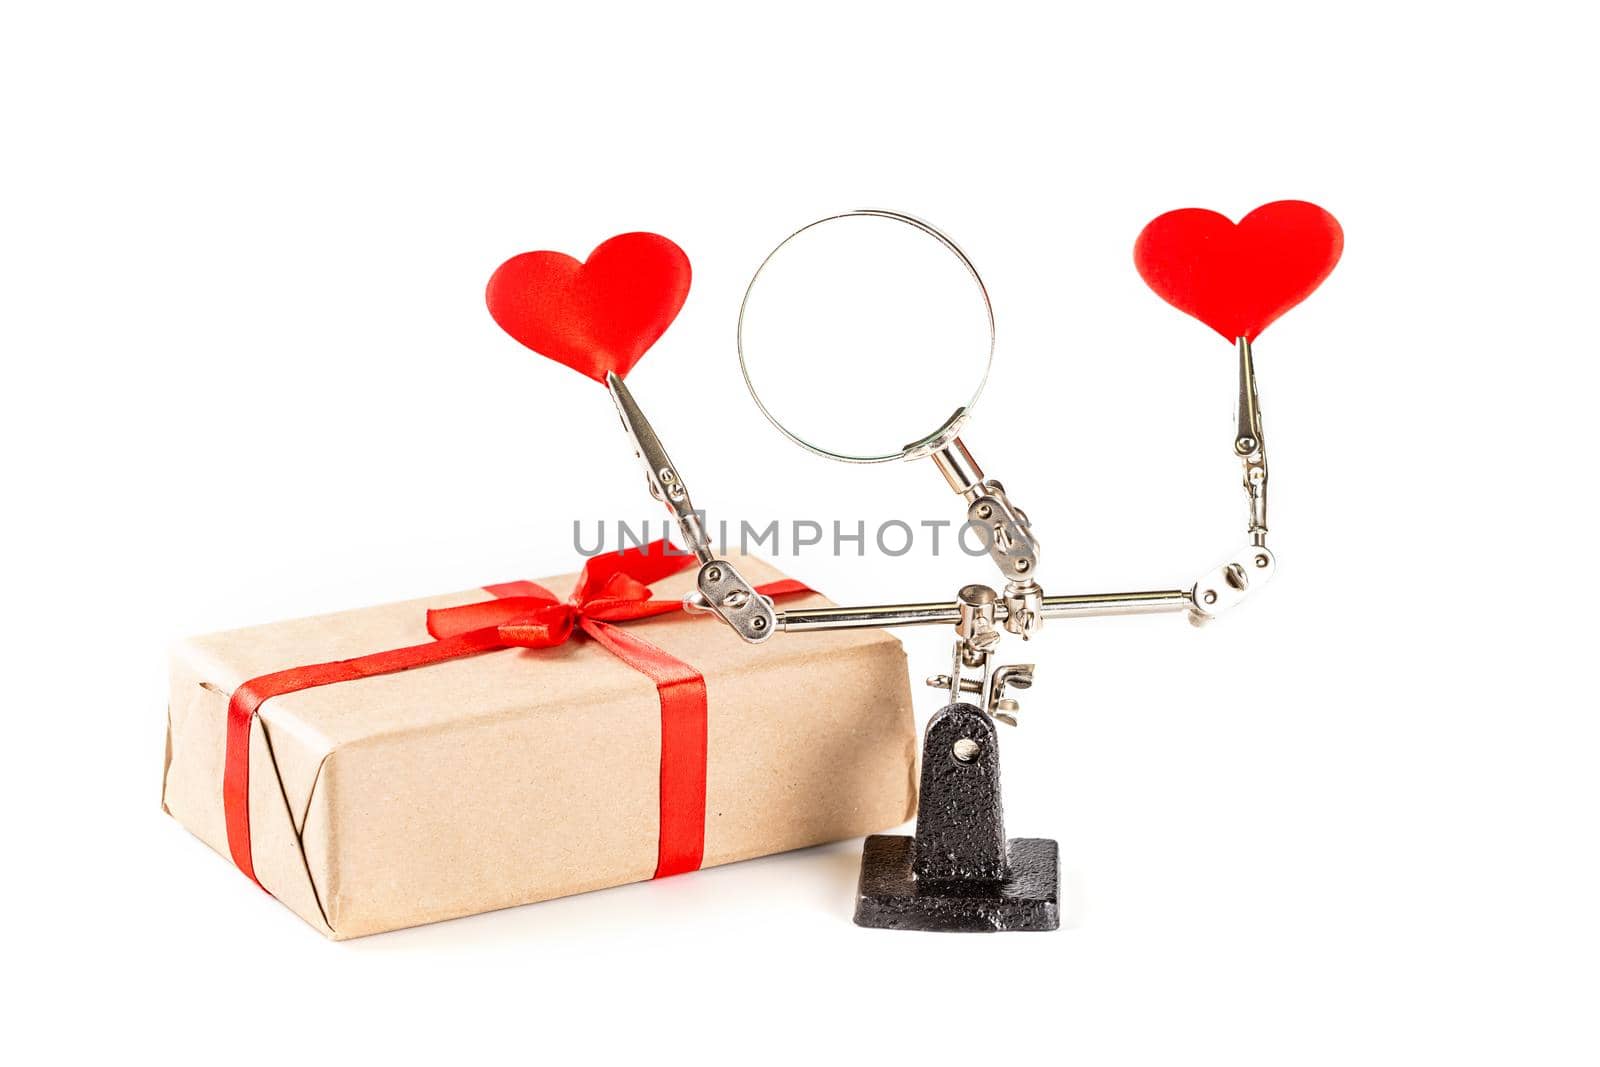 Abstract Valentines Day background with engineering tool third hand holding hearts and gift on white background